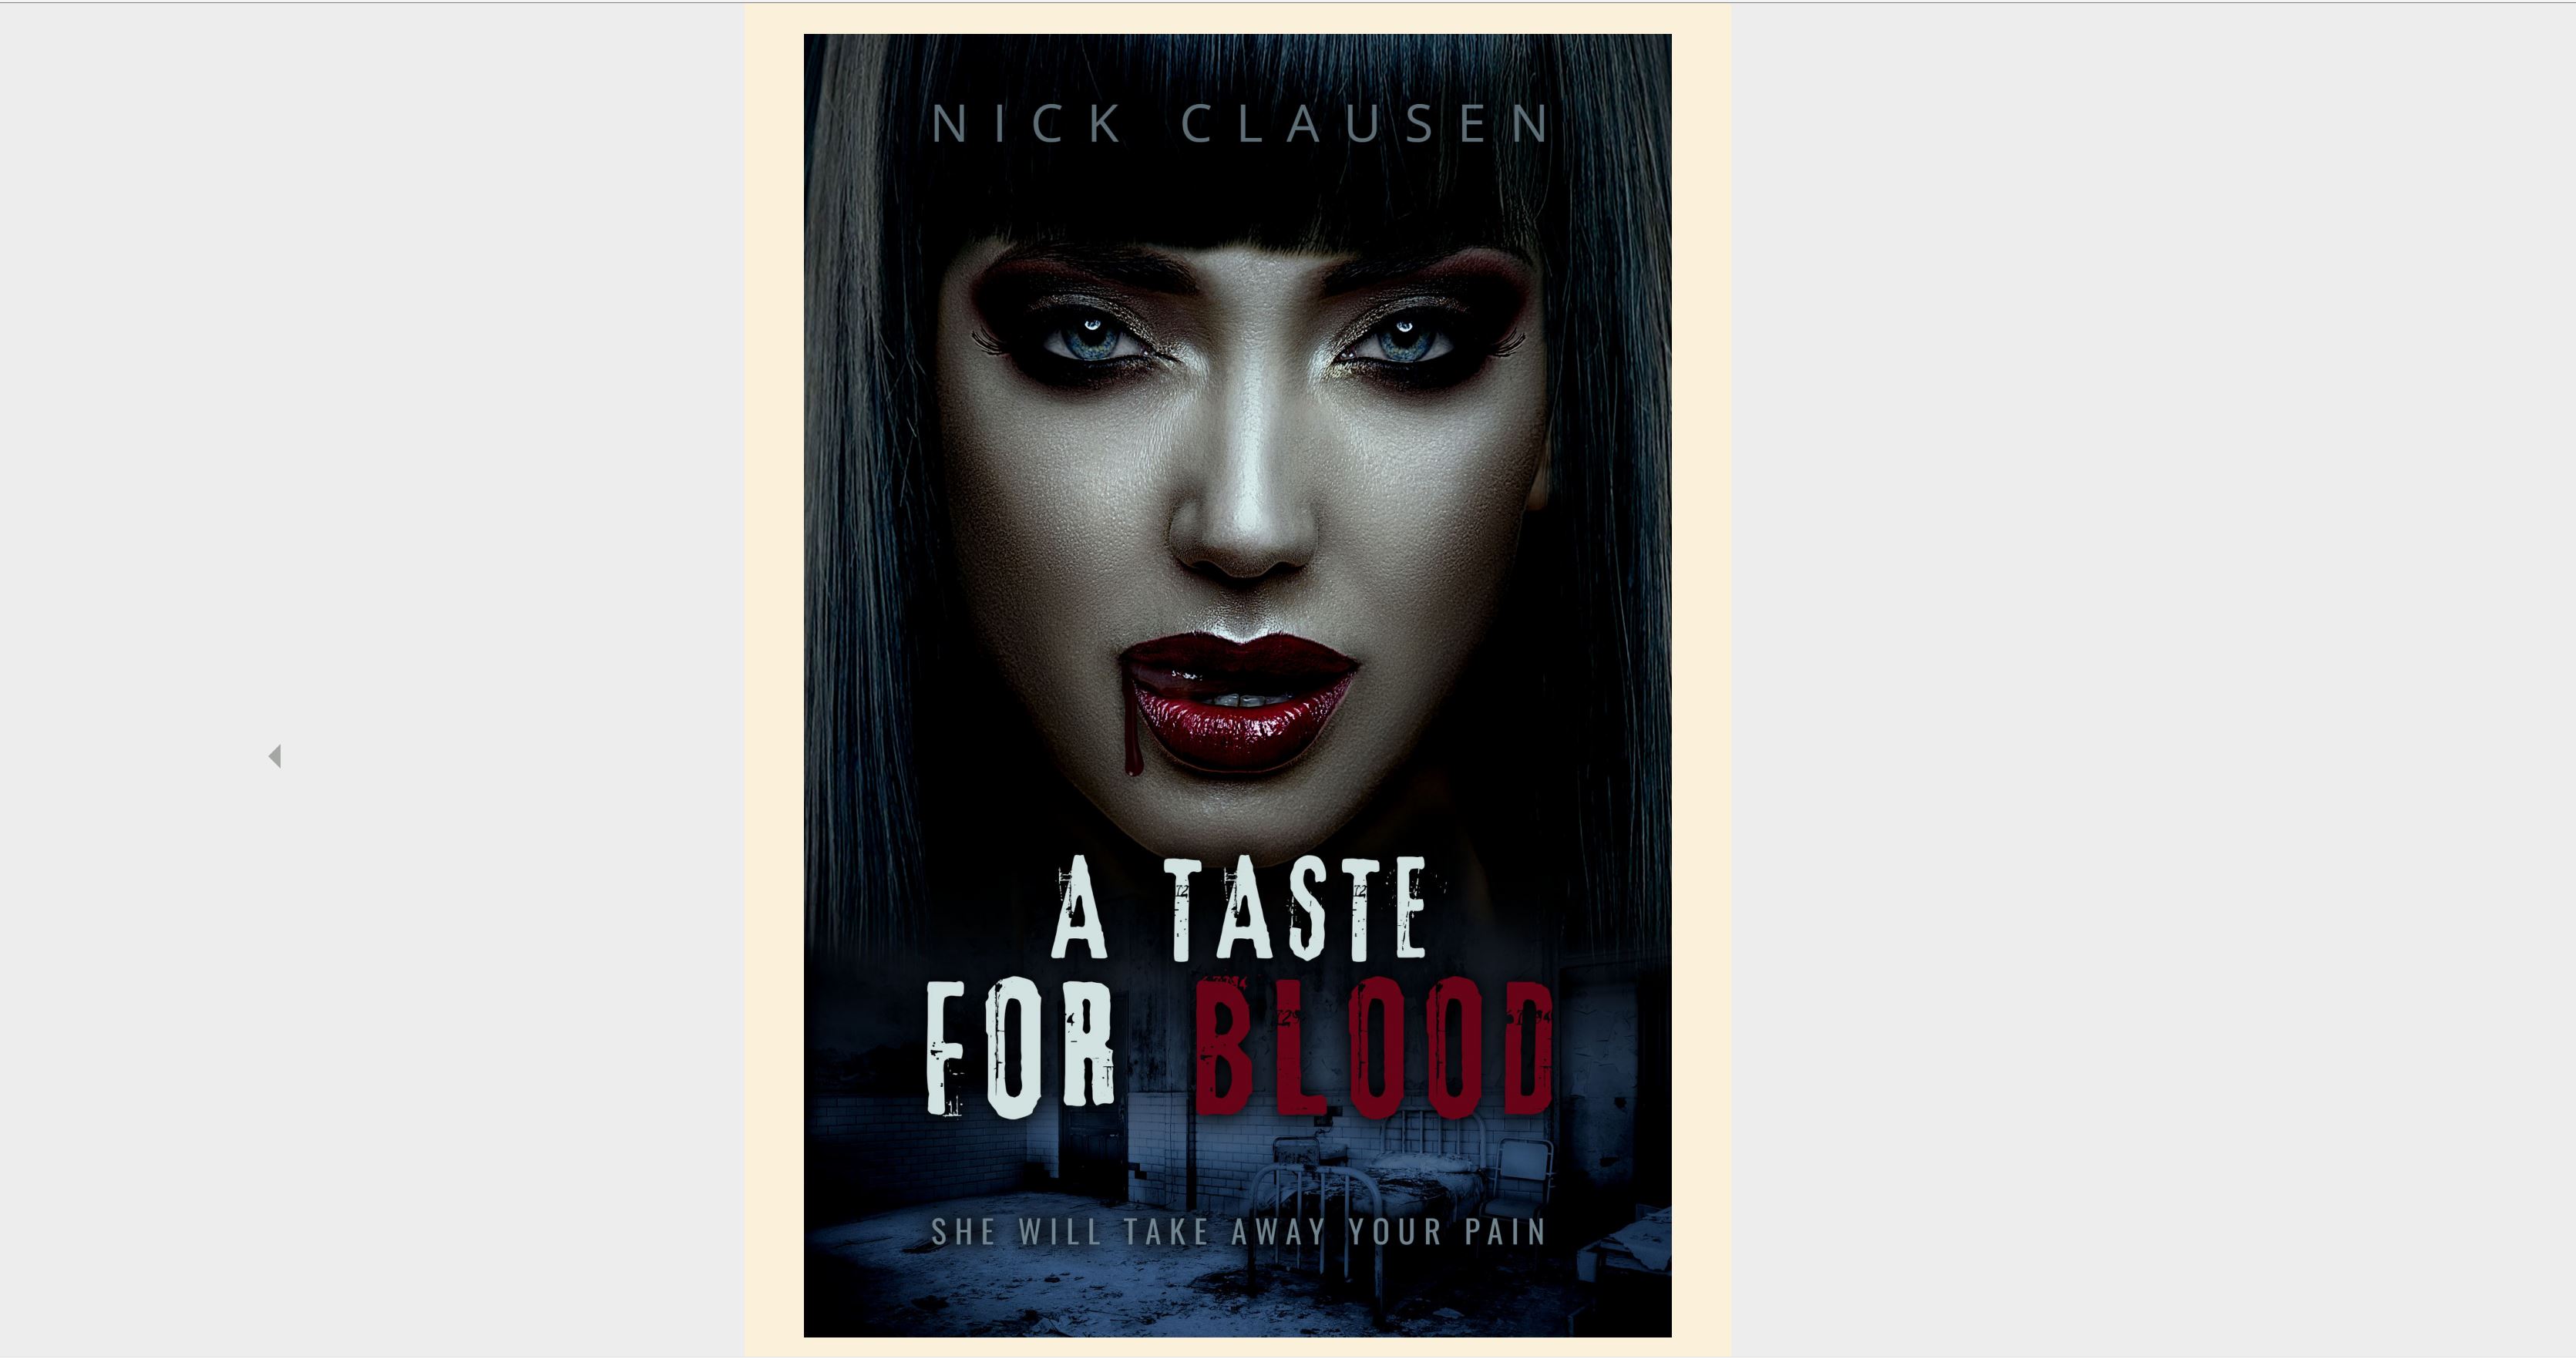 A Taste for Blood by Nick Clausen book image